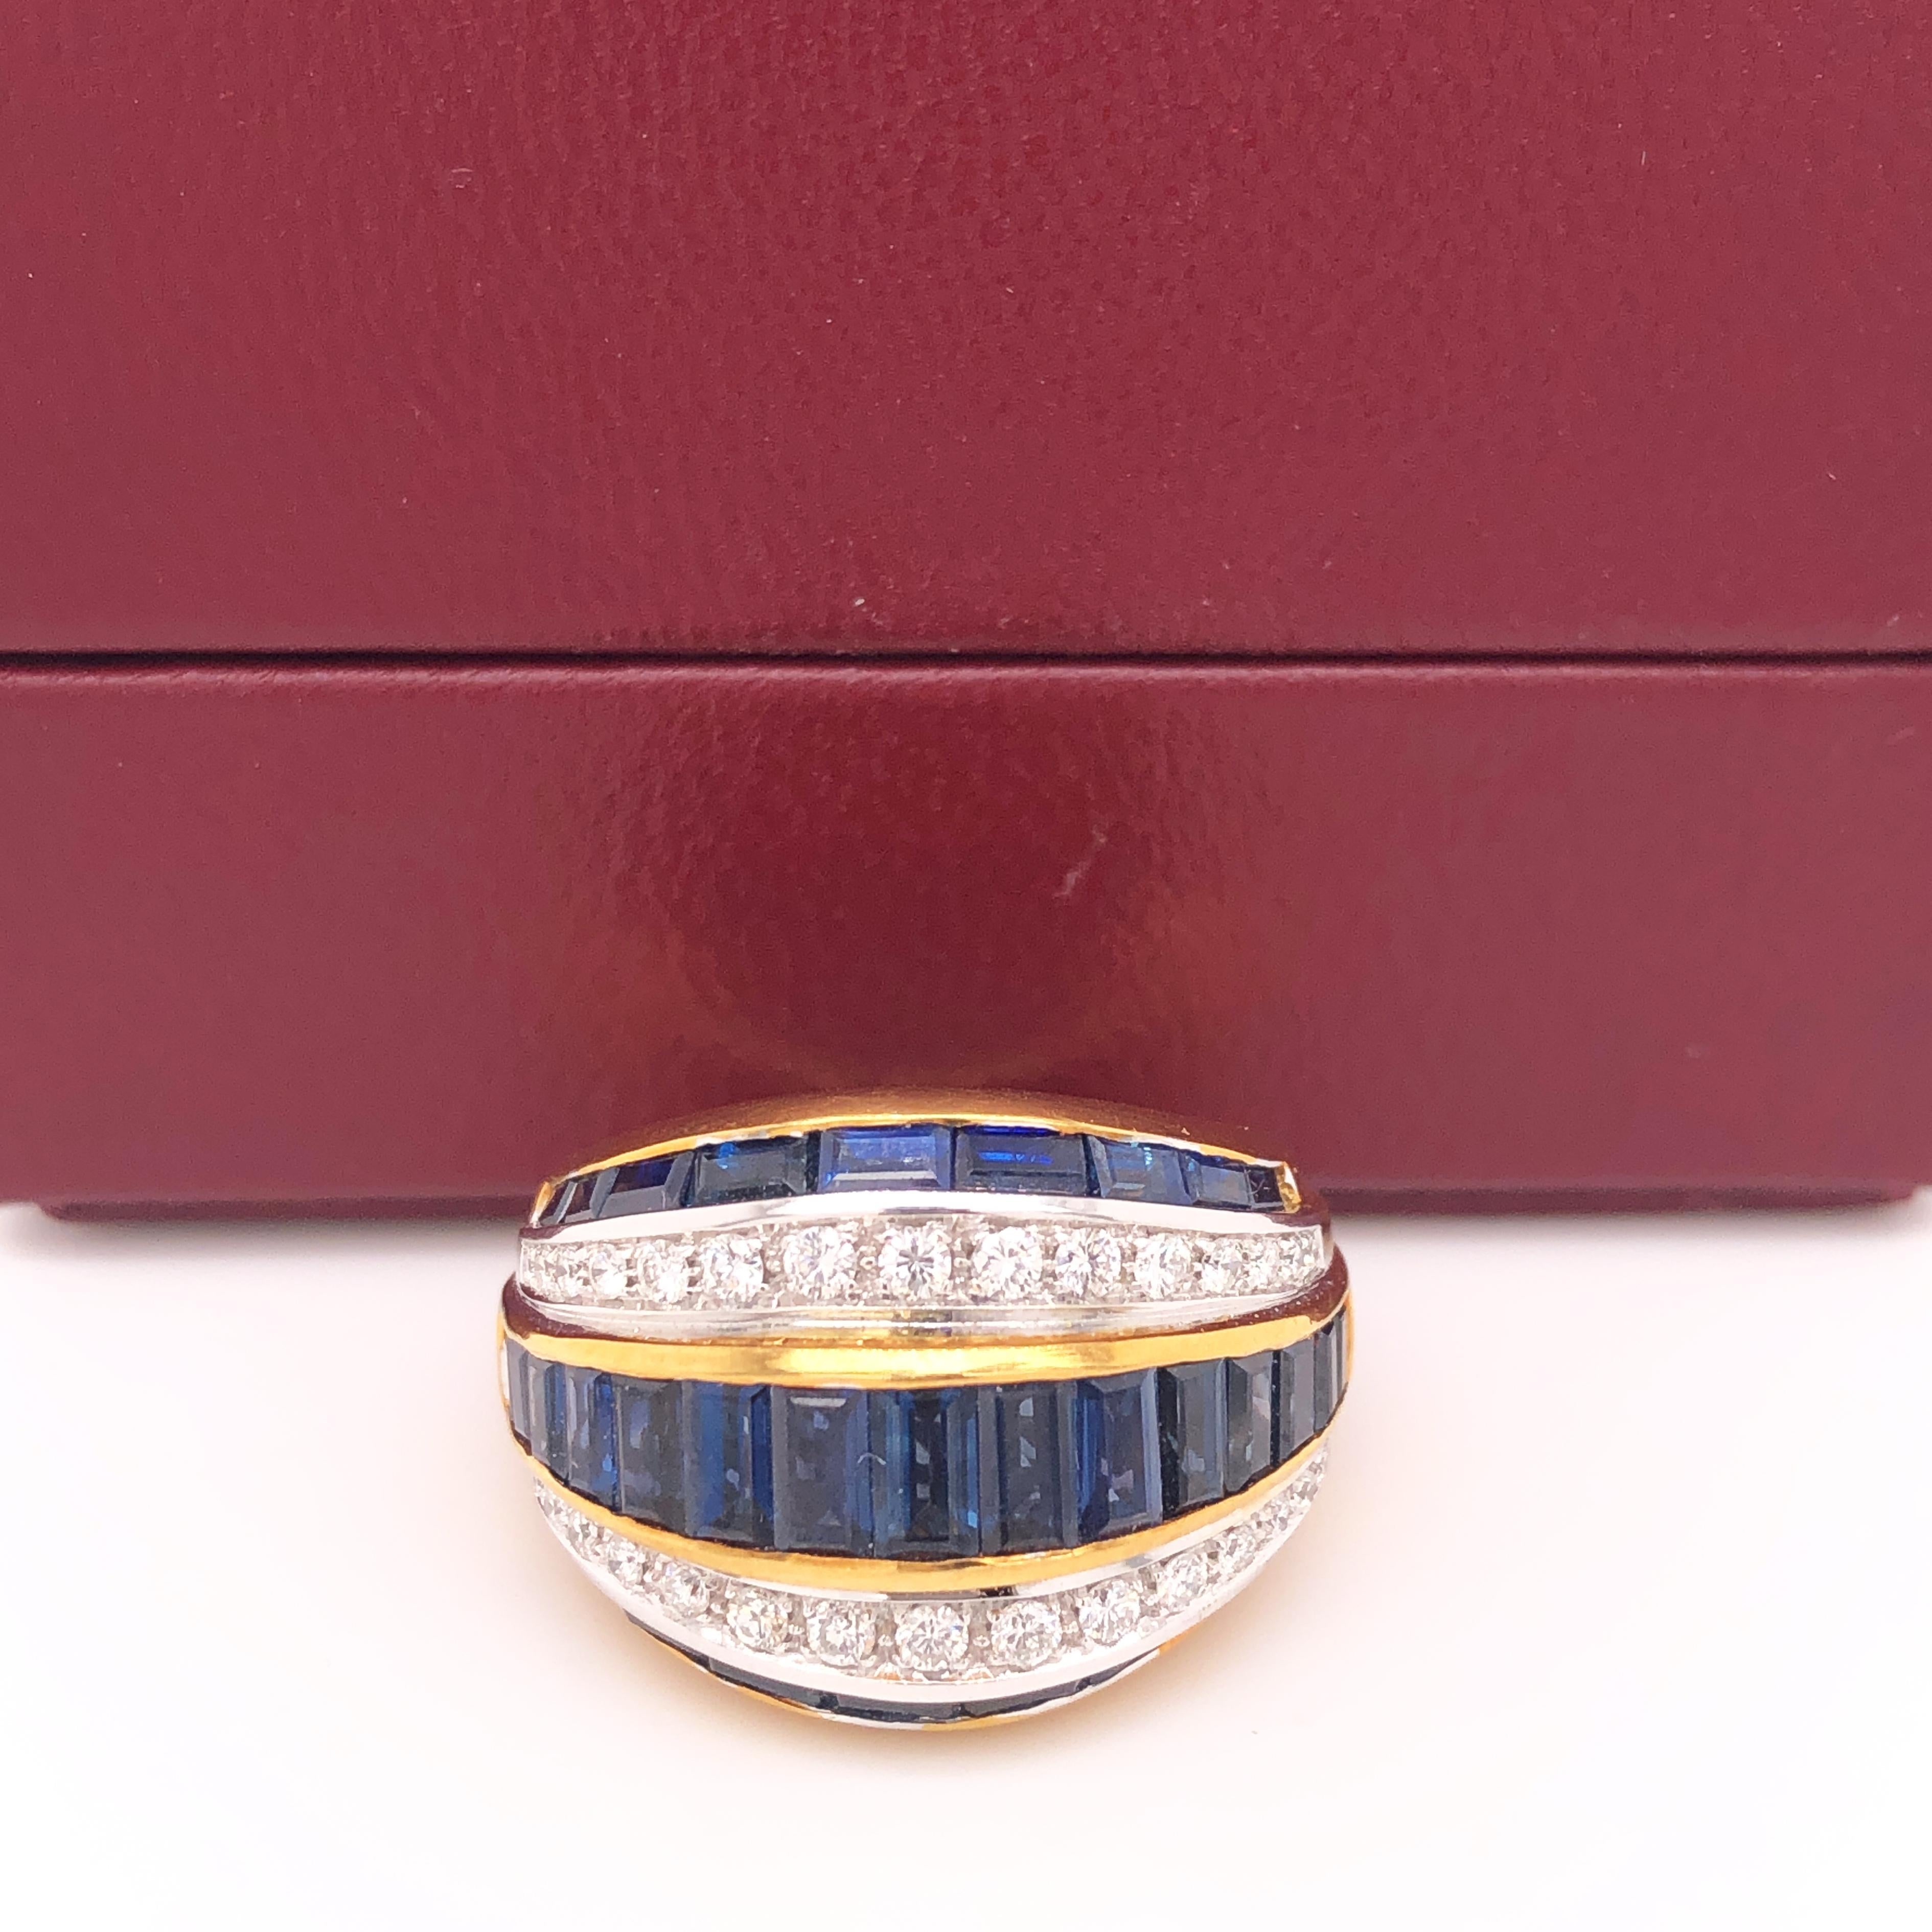 One-of-a-kind, Original 1980, Sumptuous, Unique yet Timeless Cocktail Ring Featuring 5.33Kt Natural Blue Sapphire Baguette Cut, 0.53Kt Top Quality White Diamond(D-E, VVs1) in a White and Yellow 18Kt Gold Setting.
In Our Fitted Burgundy Leather